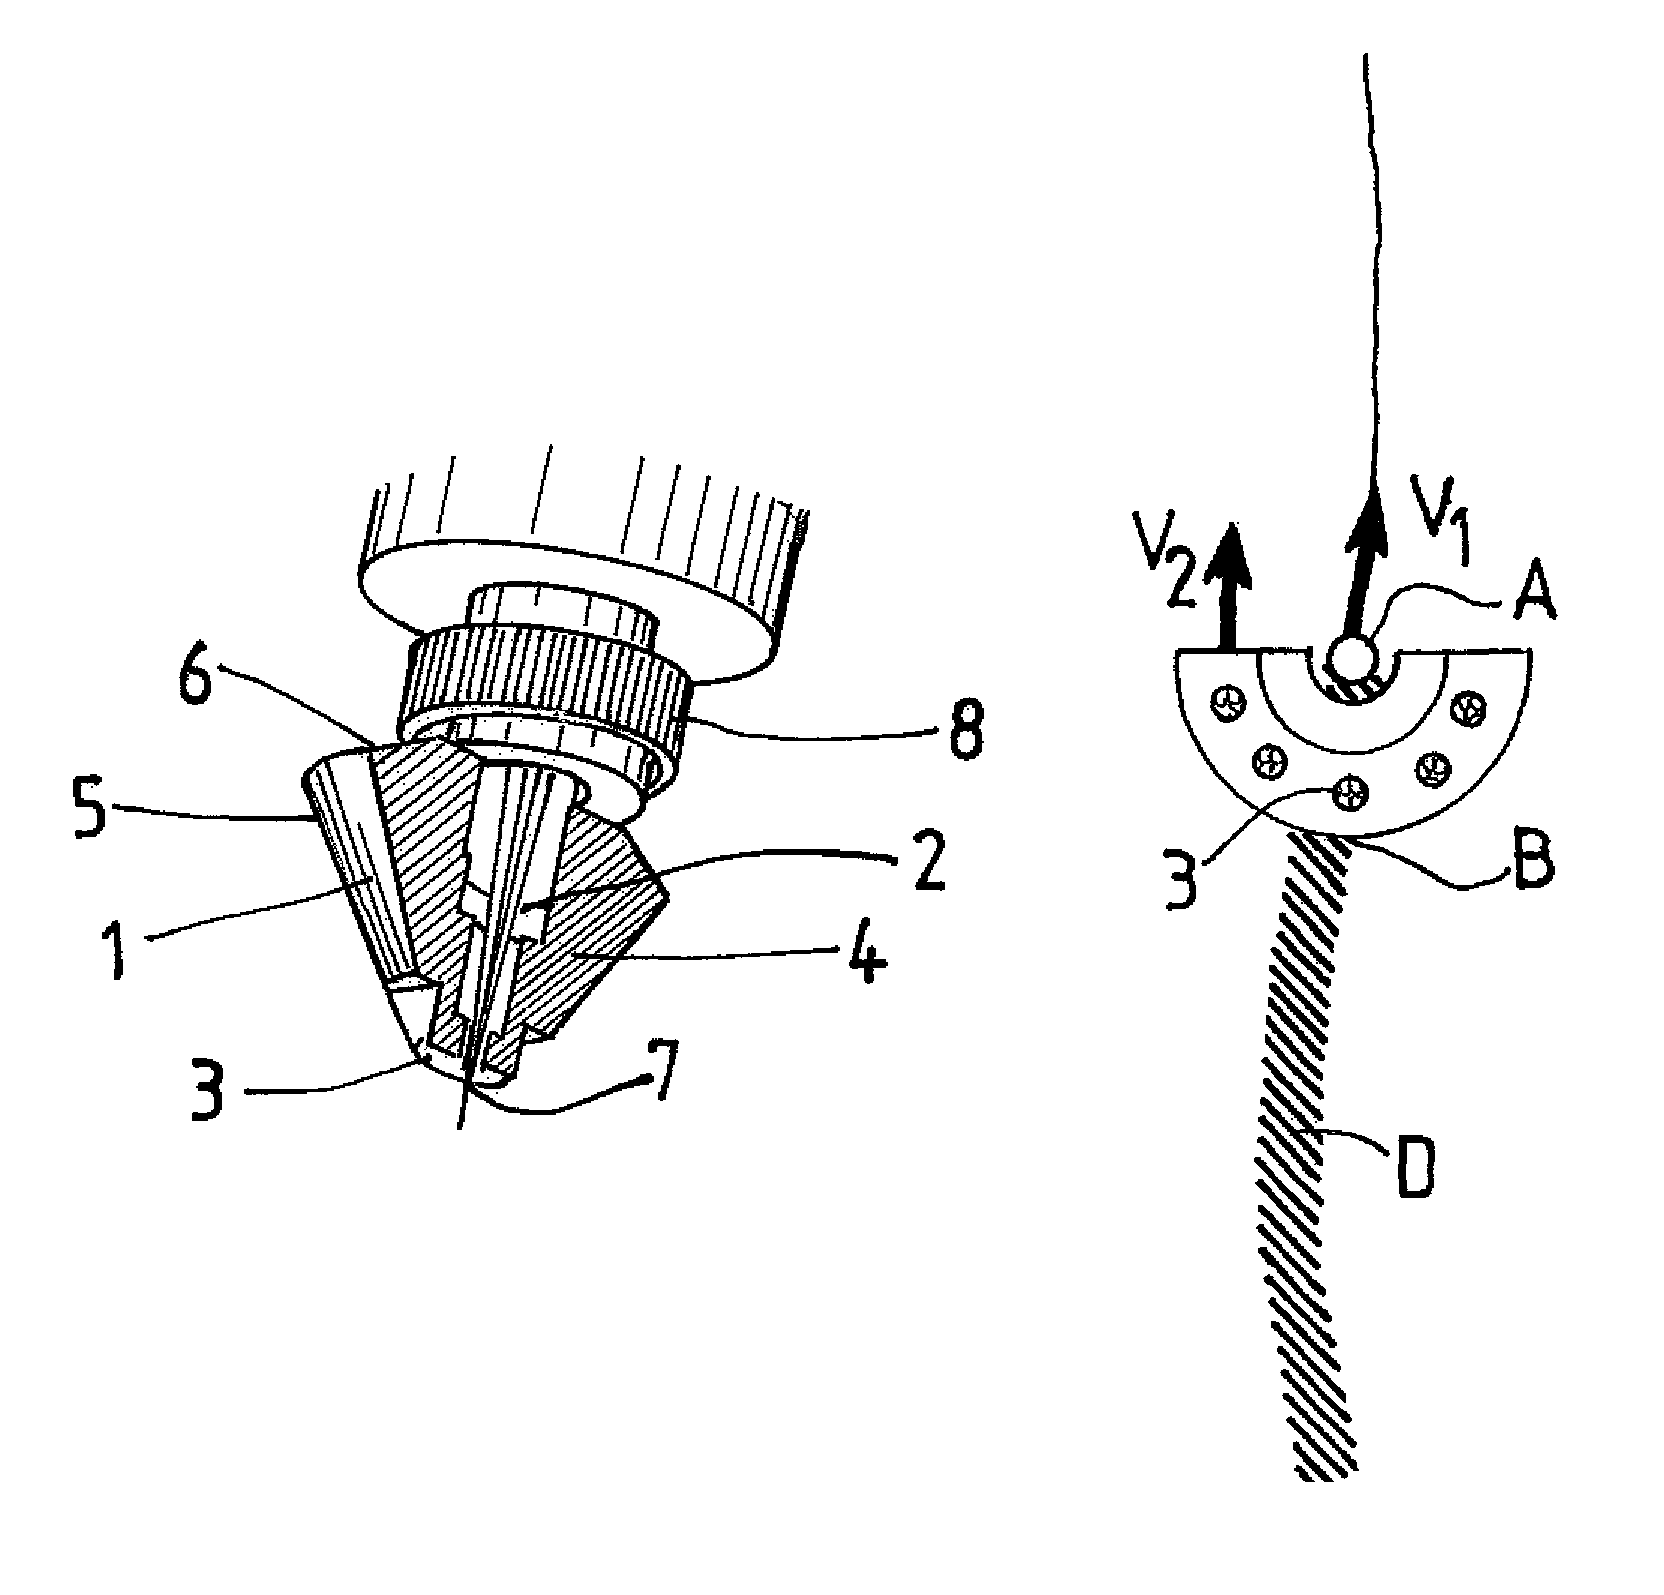 Method for laser welding using a nozzle capable of stabilizing the keyhole